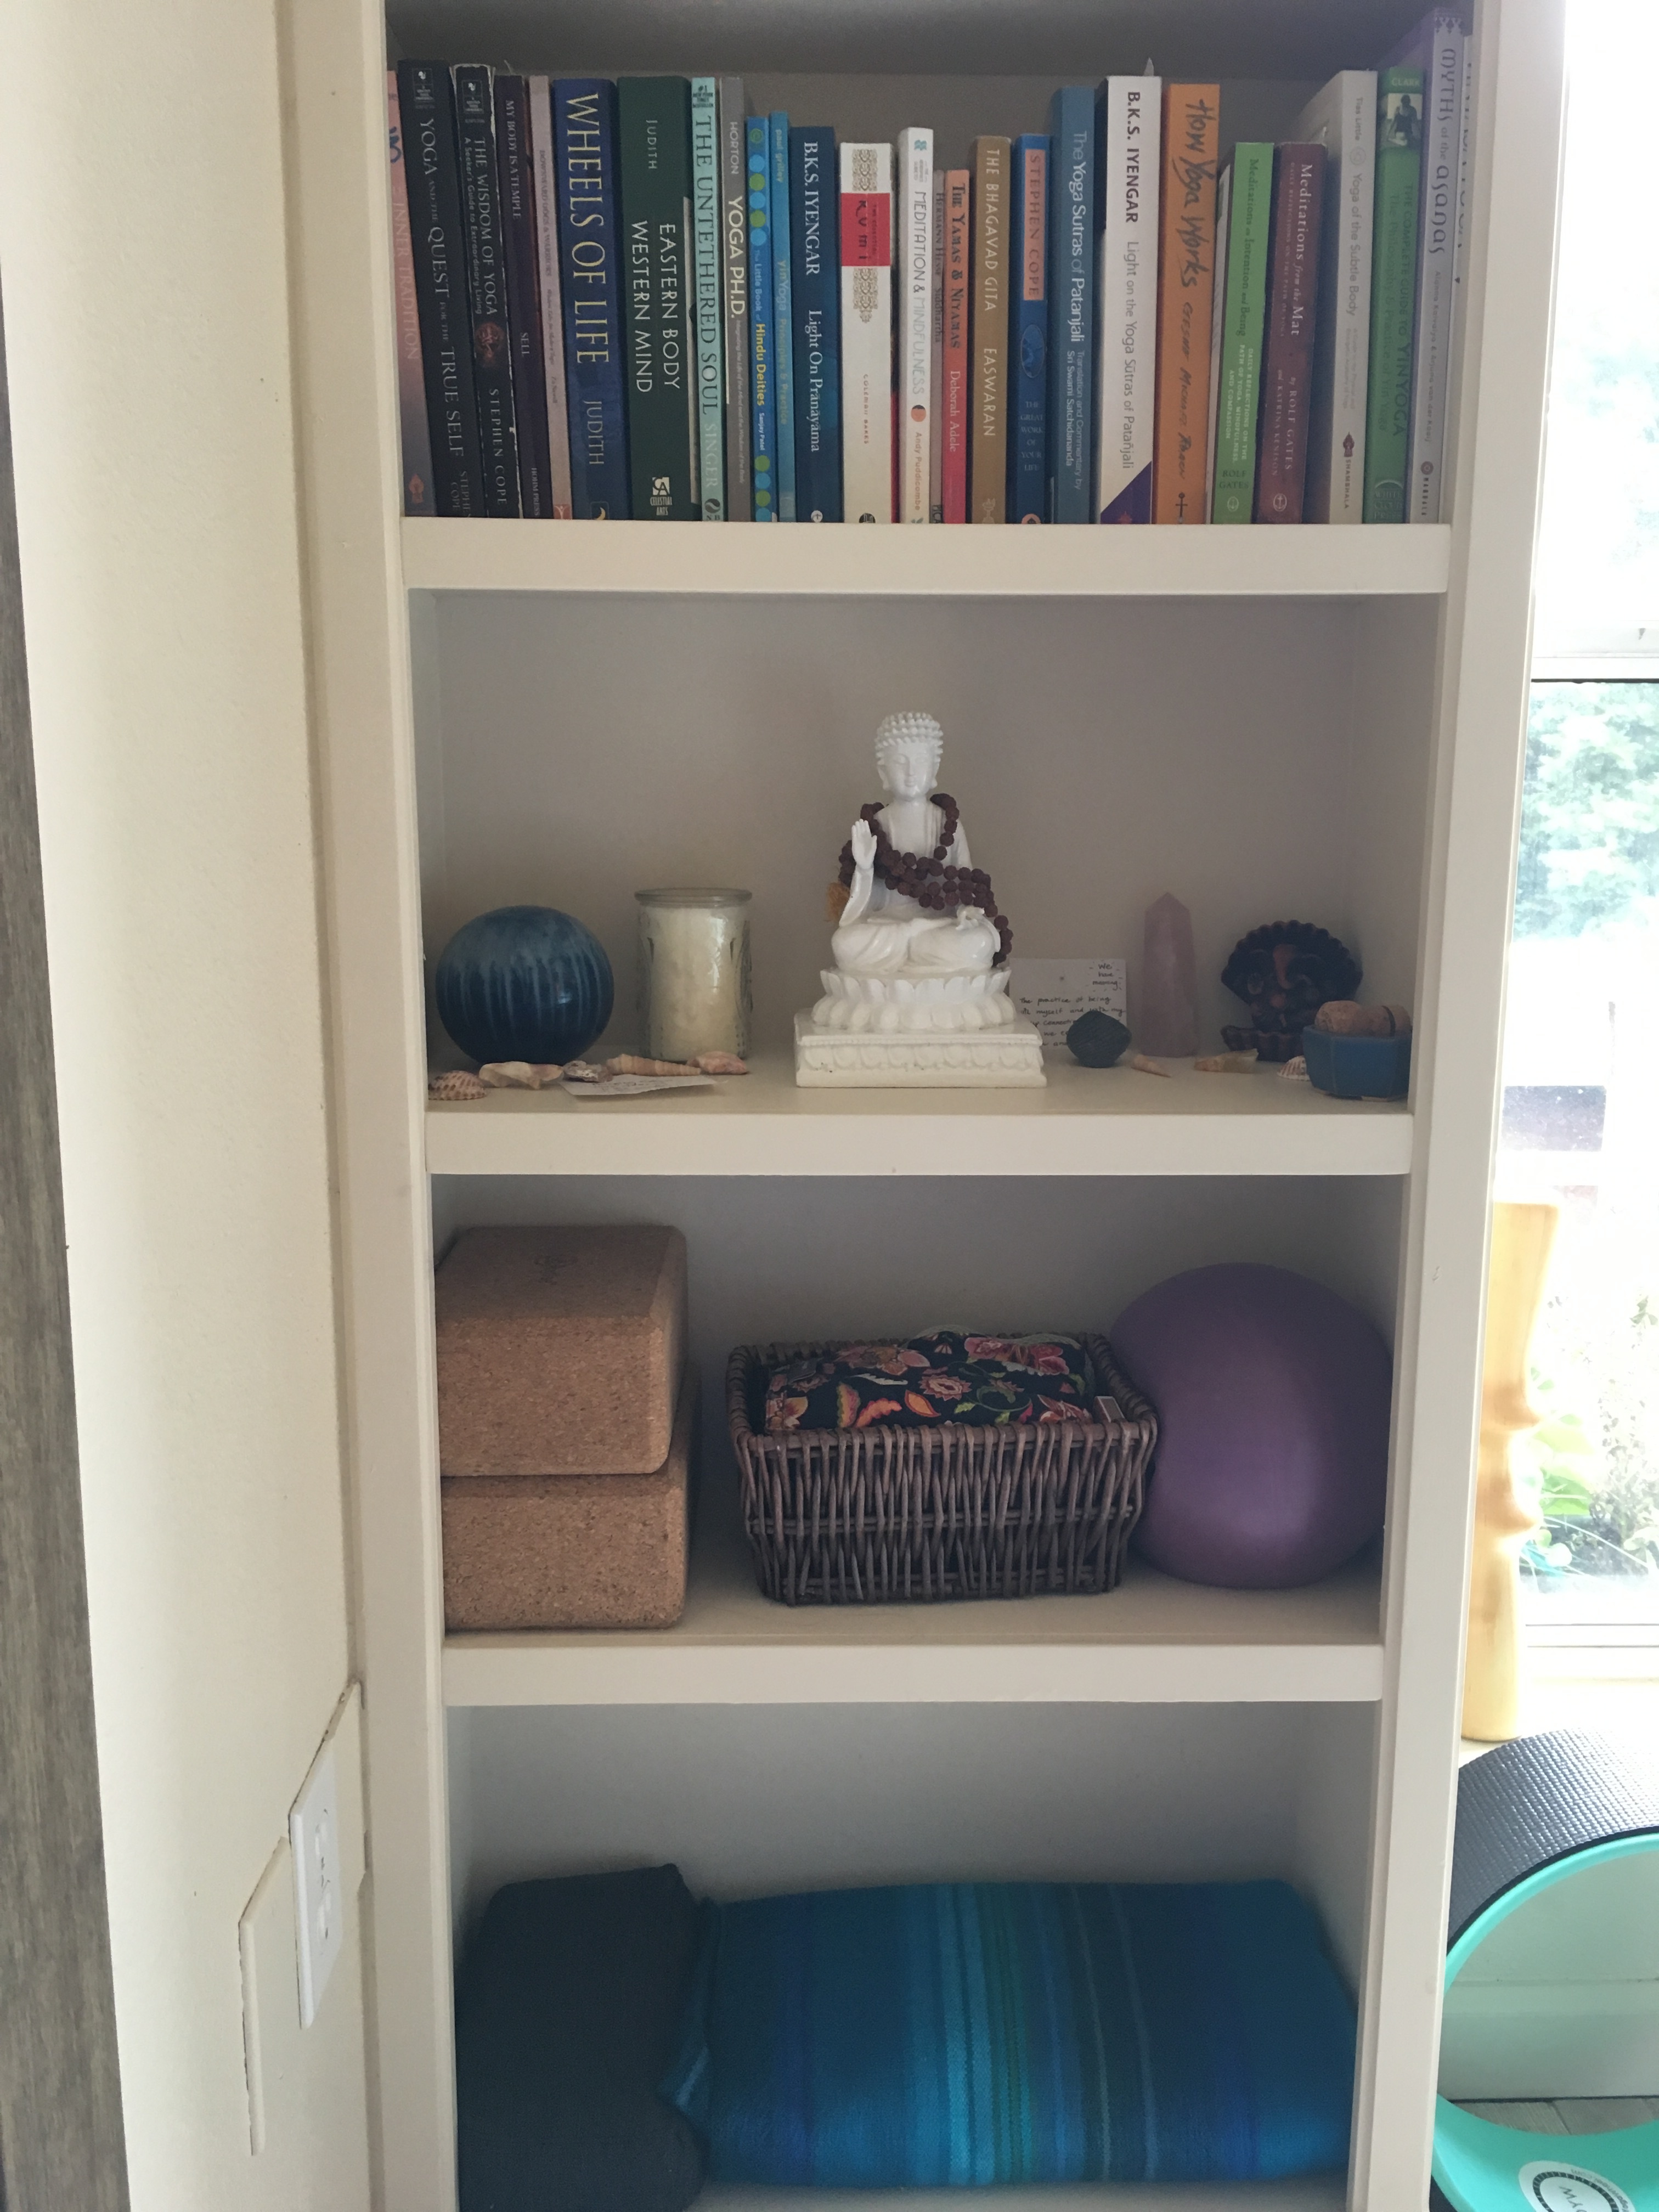 https://robinpenney.yoga/wp-content/uploads/2018/01/Yoga-Prop-and-Books-Storage.jpg